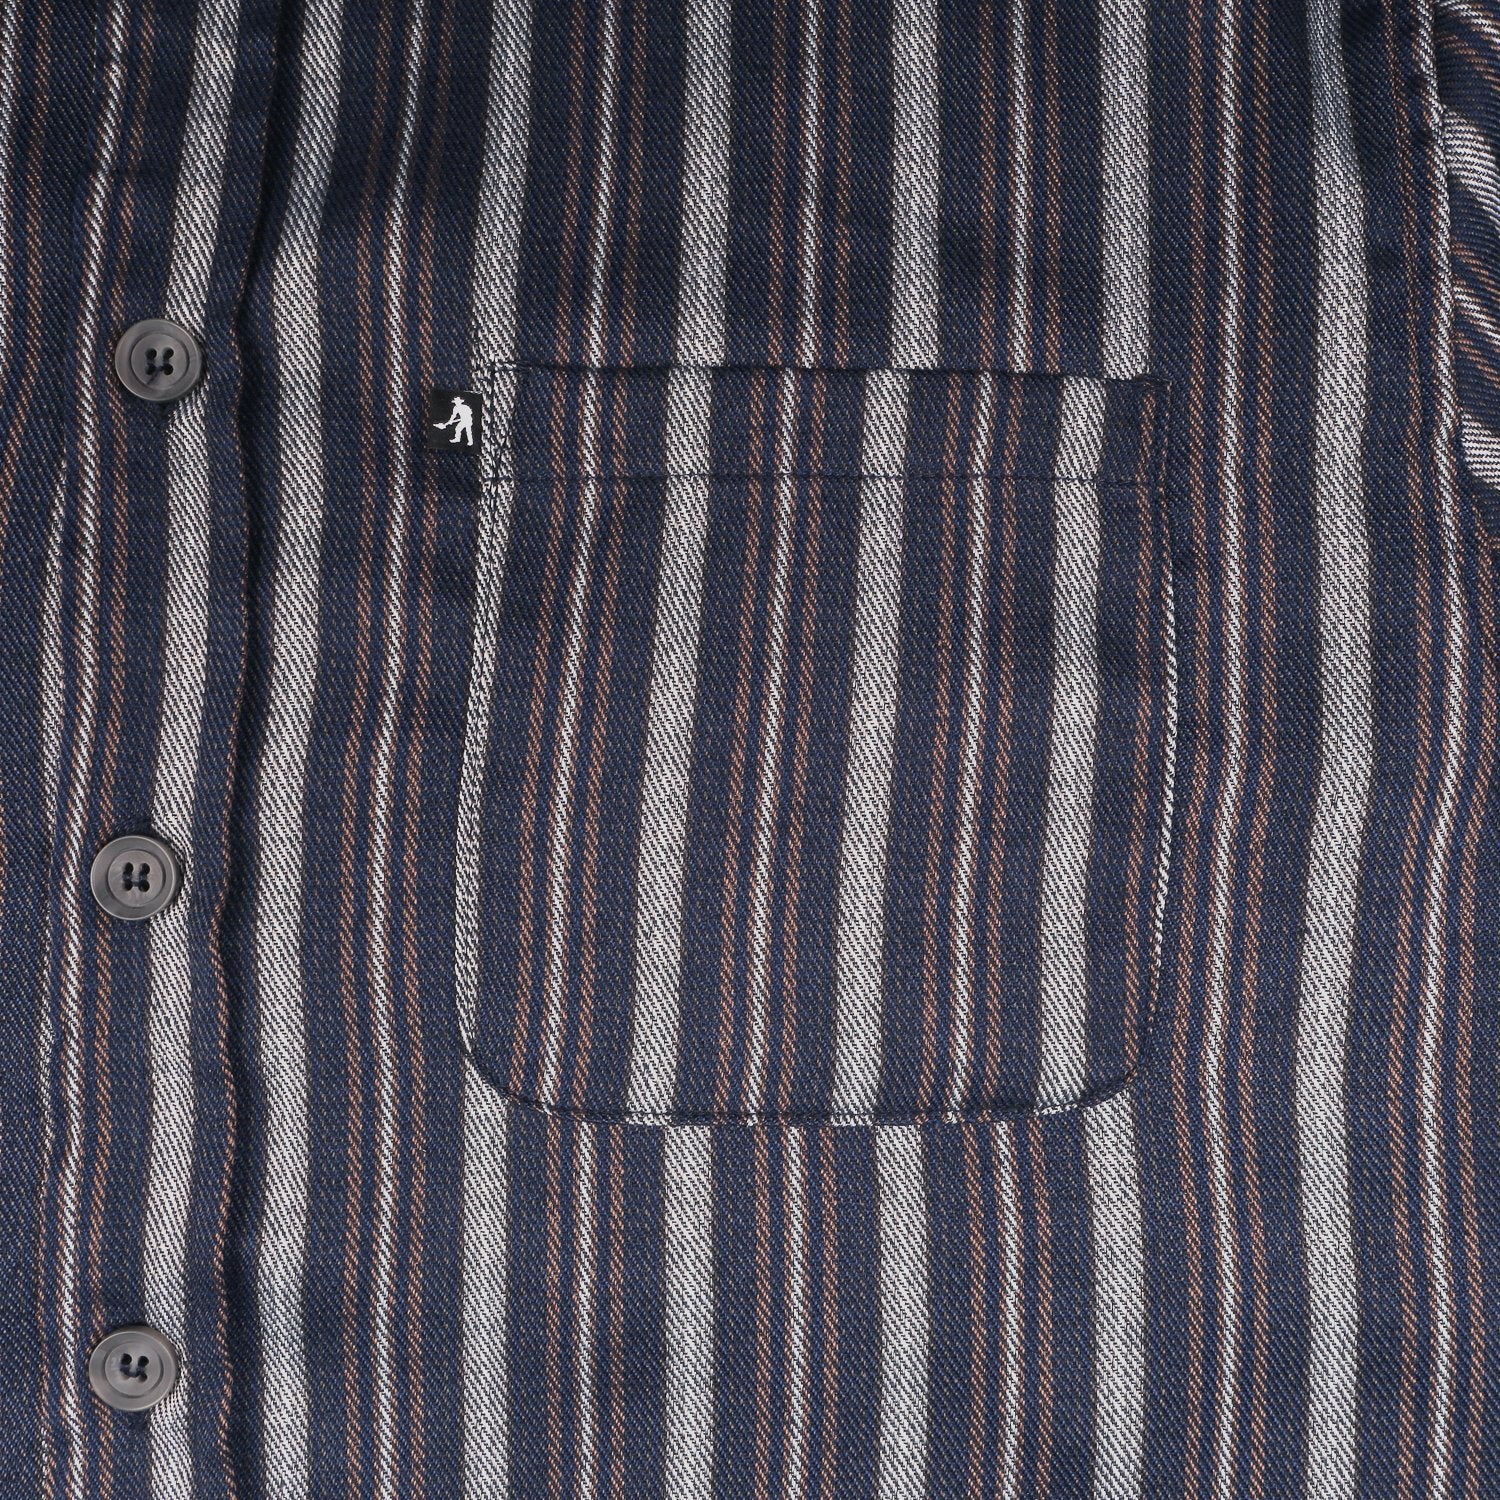 PASS~PORT "WORKERS STRIPES" L/S SHIRT NAVY